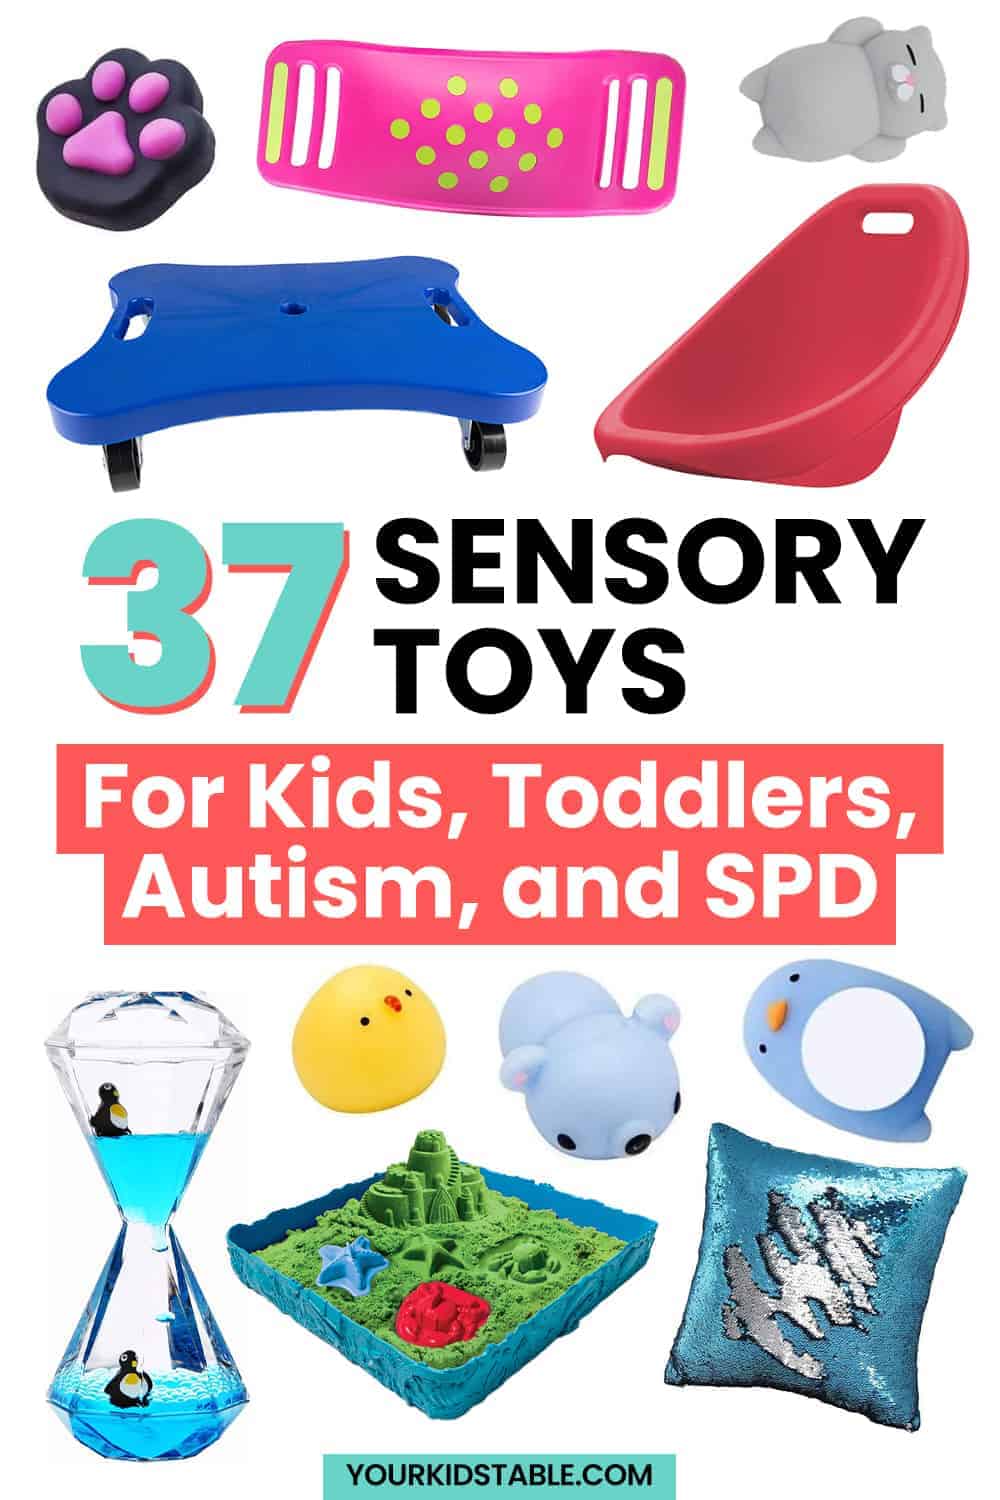 The best sensory toys from an occupational therapist. Perfect for kids, autism, toddlers, and sensory issues because sensory toys help develop a child's learning, communication, and emotional regulation! 